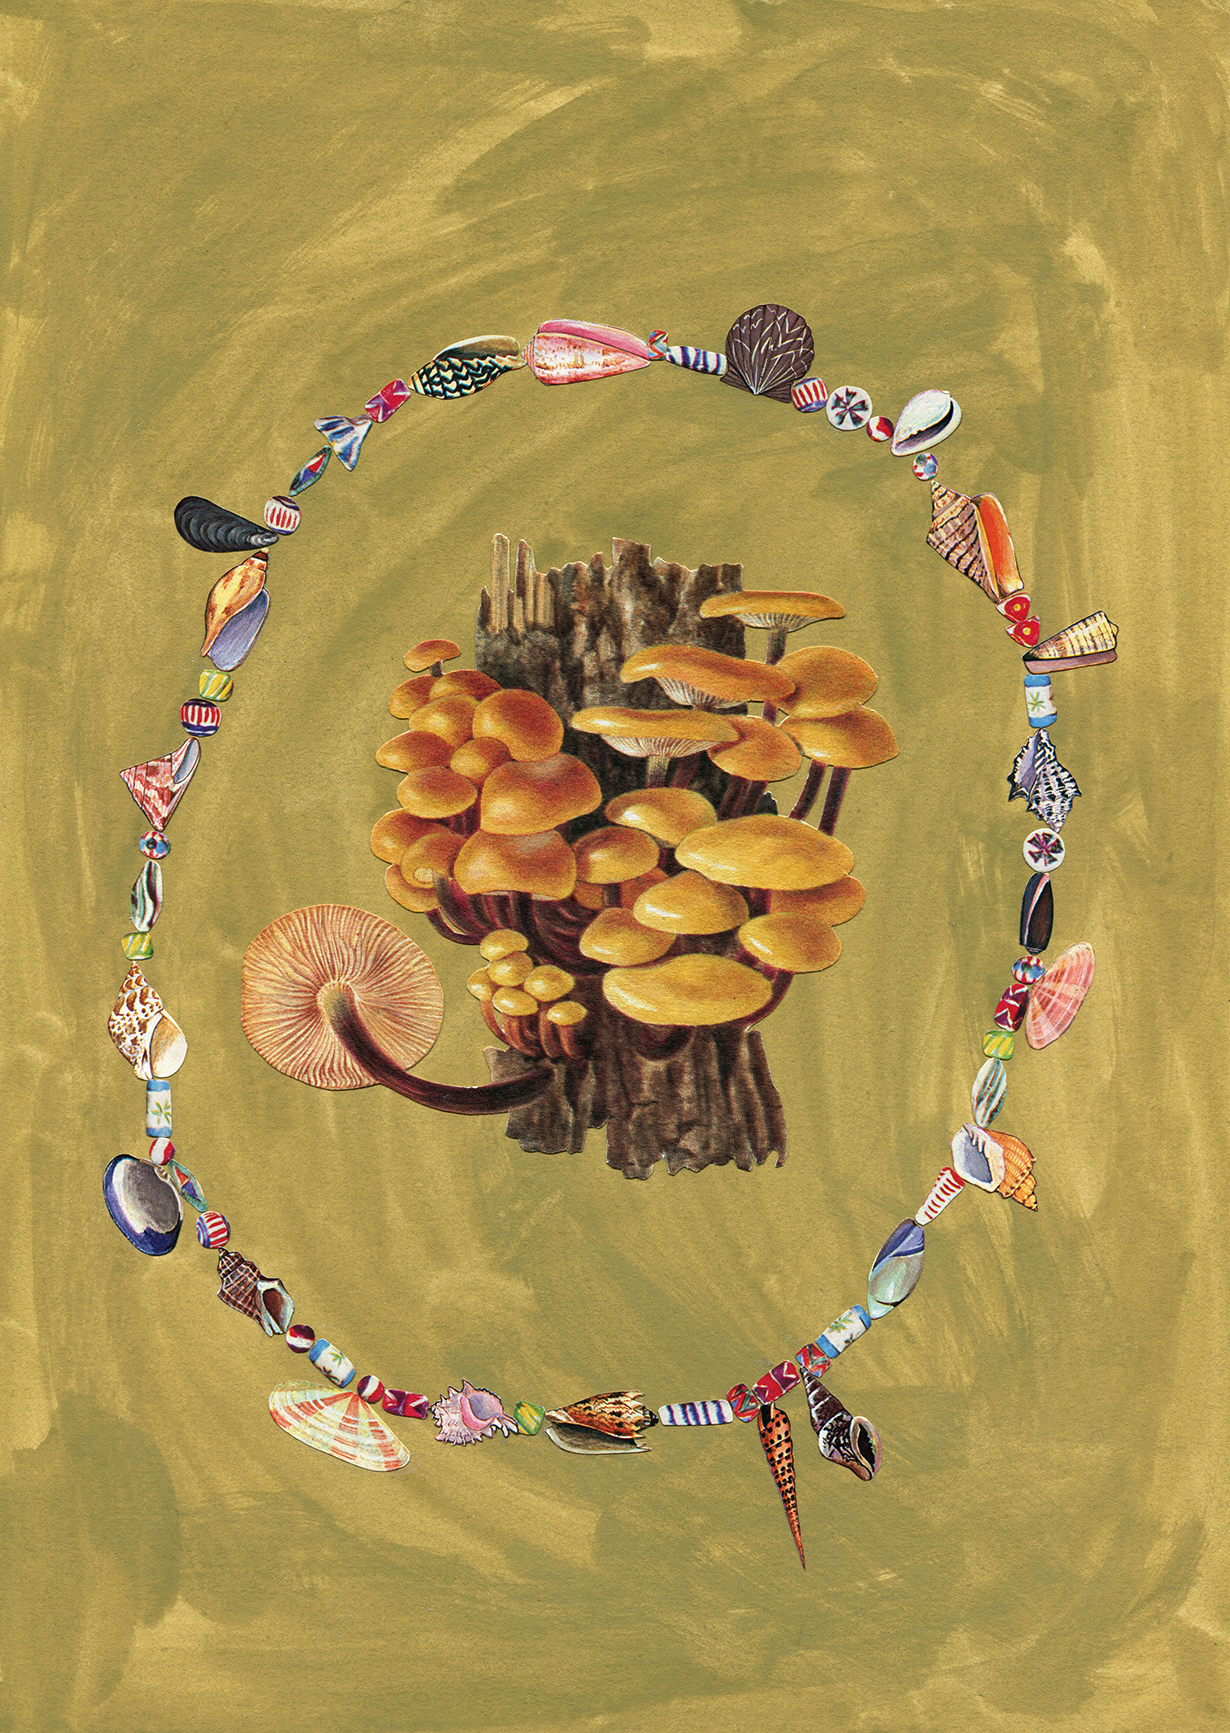 Mushrooms with Beaded Necklace # 1, 2020, collage, found paper, acrylic gouache, 210mm x 297mm